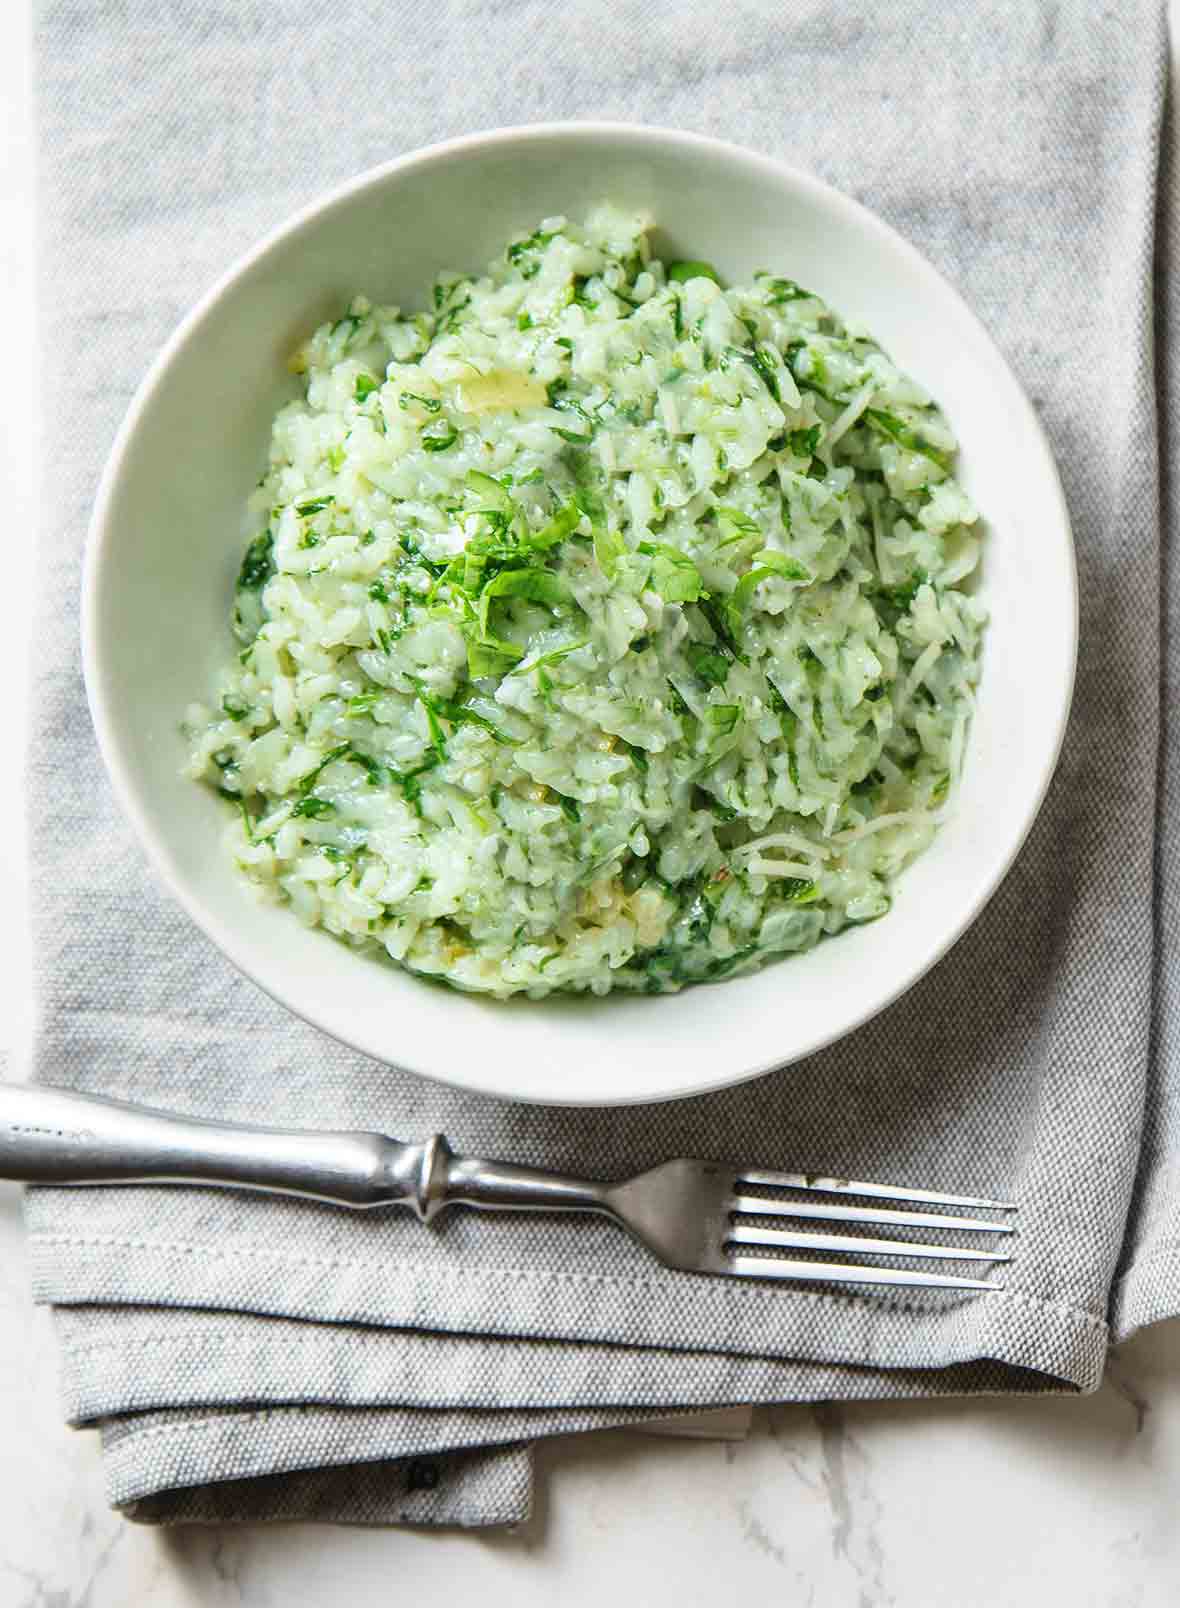 A white bowl filled with spinach and arugula risotto on a grey linen napkin.